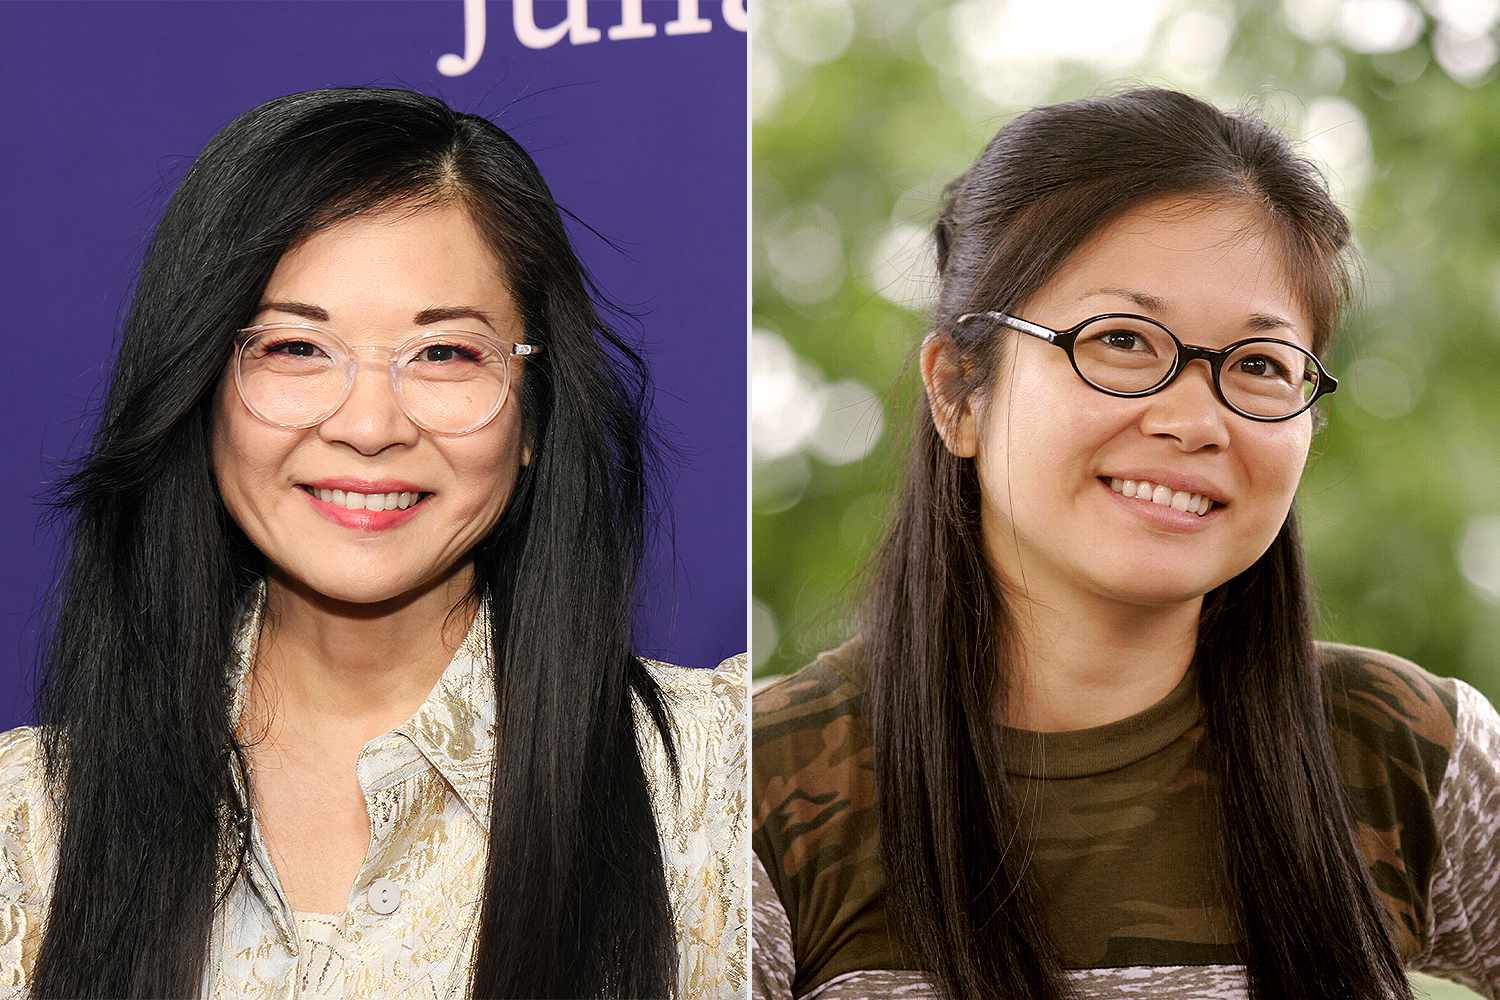 'Gilmore Girls'' Keiko Agena Has Conflicting Feelings About Memorable Role as Lane Kim: 'Have to Let Go of the Pressure'